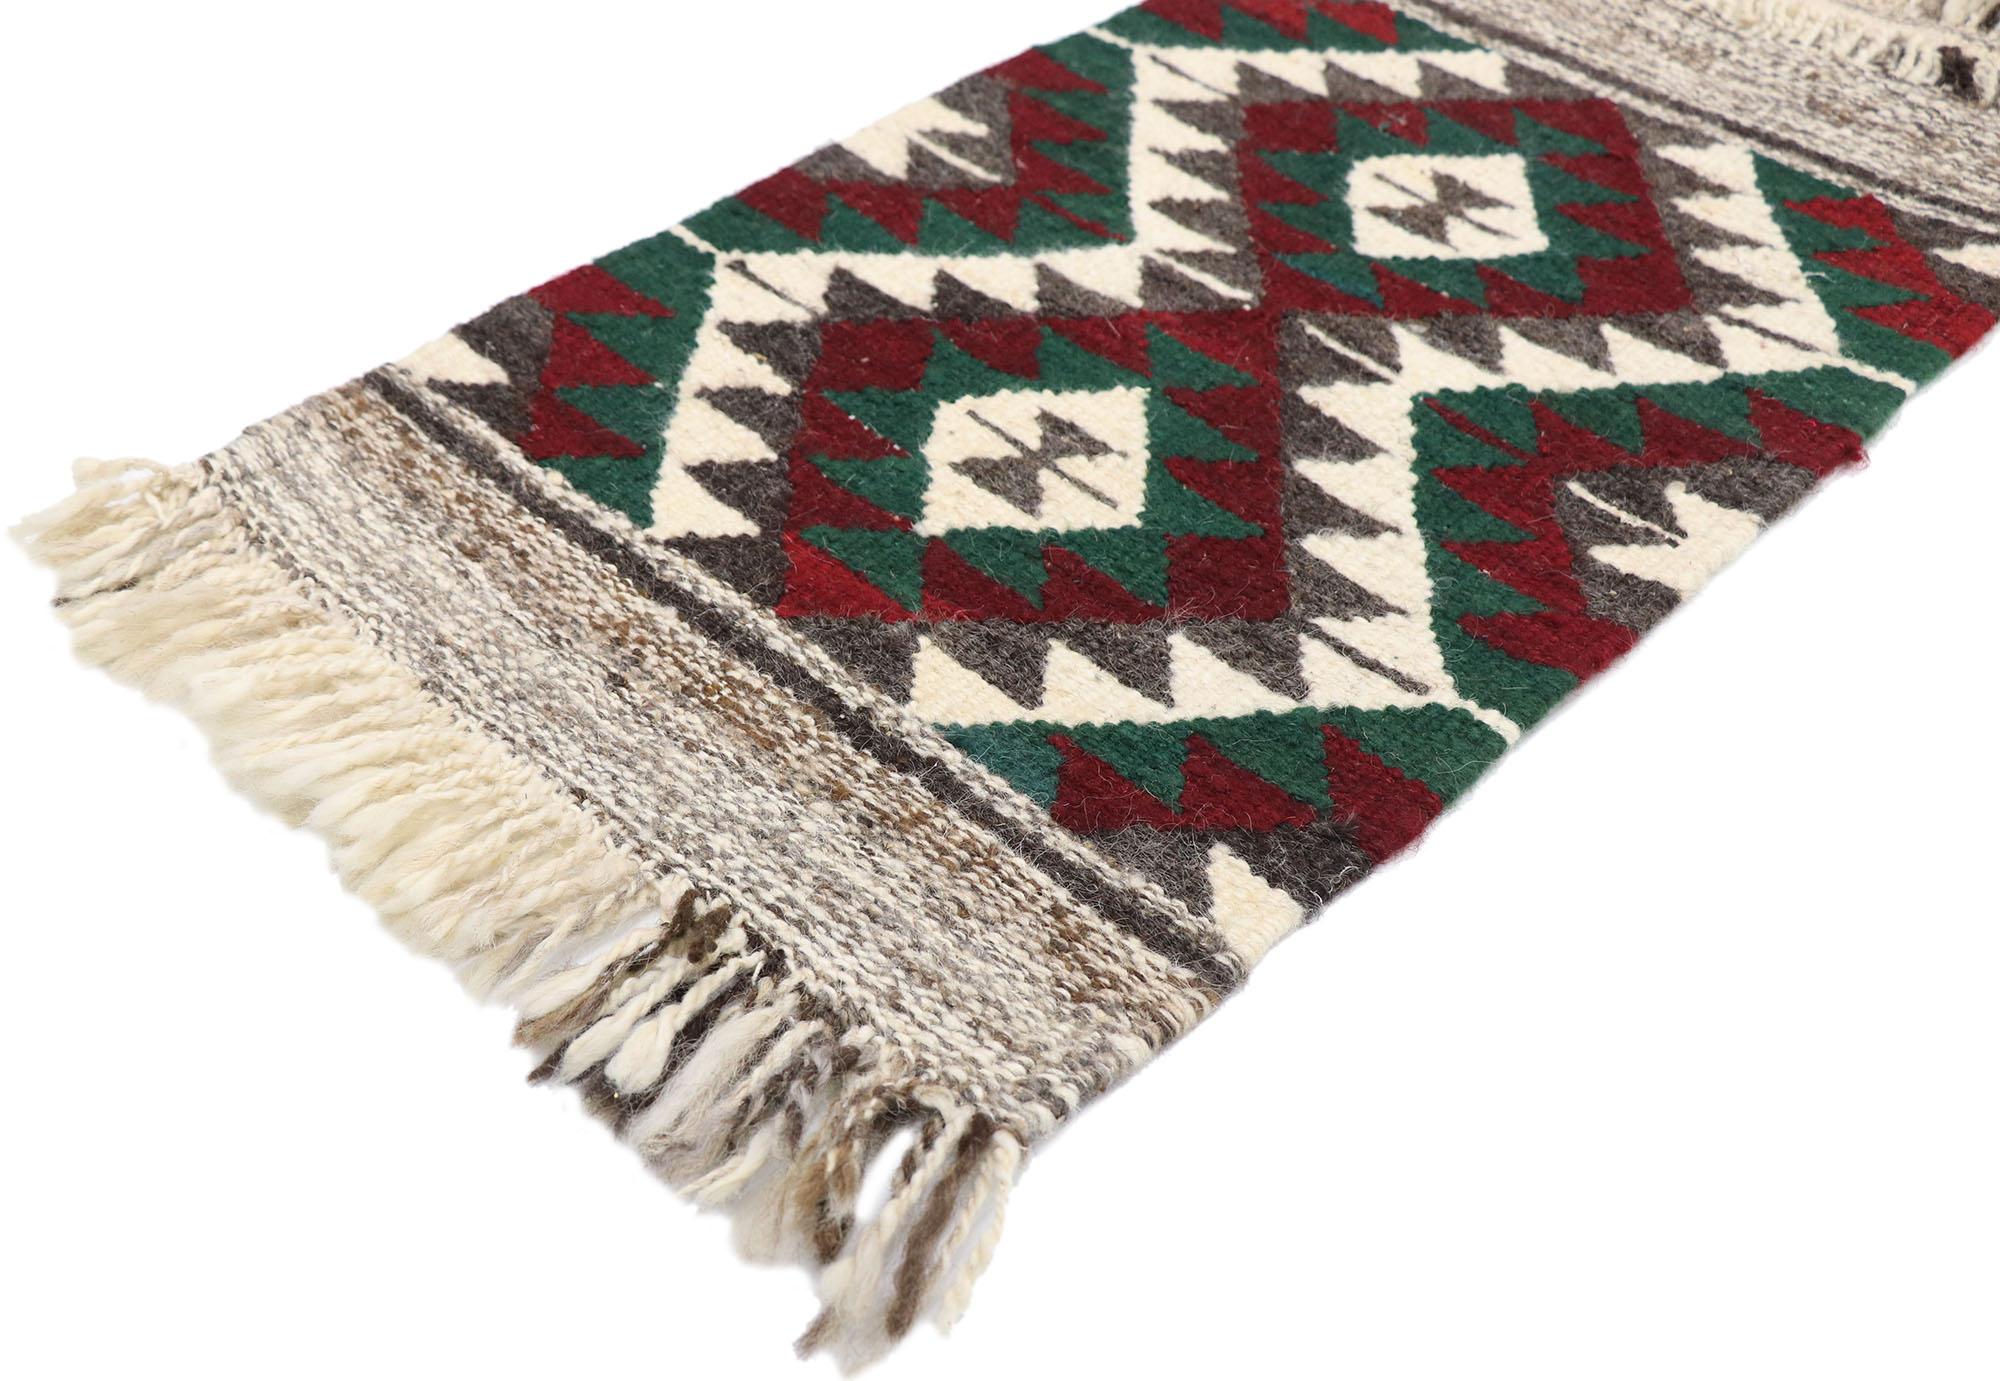 77896 Vintage Persian Shiraz Kilim rug with Tribal style 01'07 x 02'11. Full of tiny details and a bold expressive design combined with vibrant colors and tribal style, this hand-woven wool vintage Persian Shiraz kilim rug is a captivating vision of